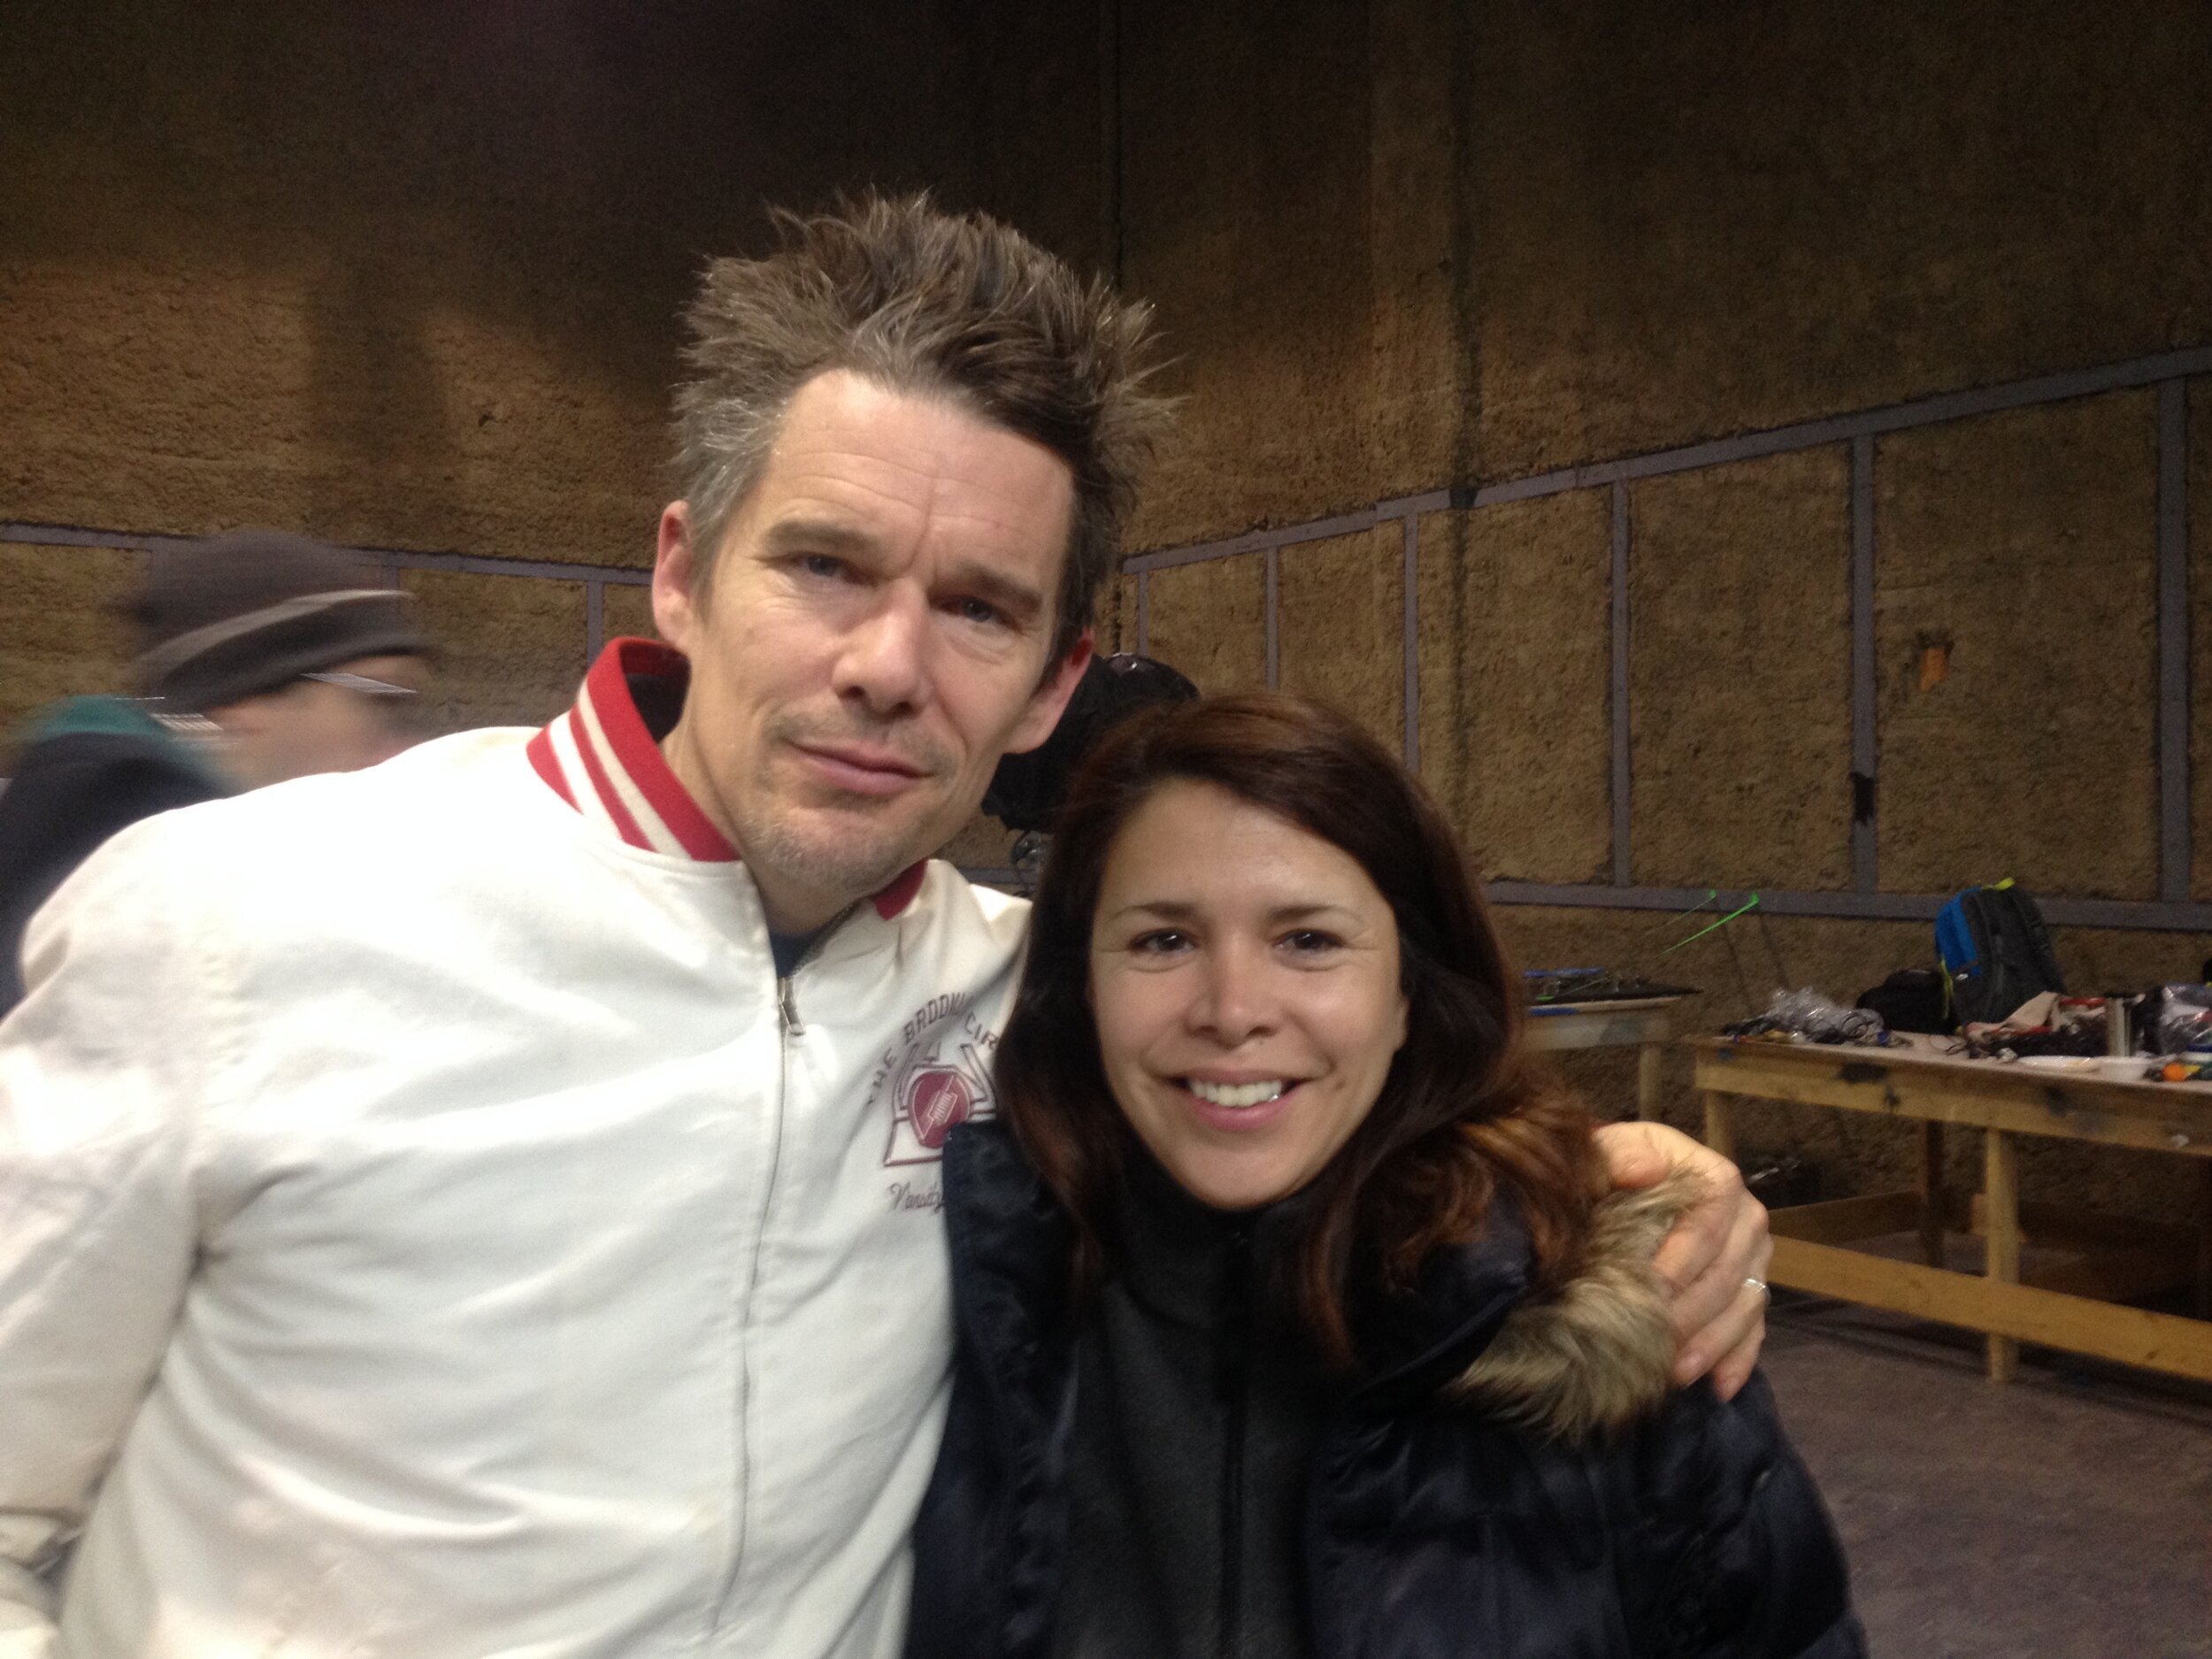 Ana Cuadra with Ethan Hawke on the set of "Maggie's Plan"